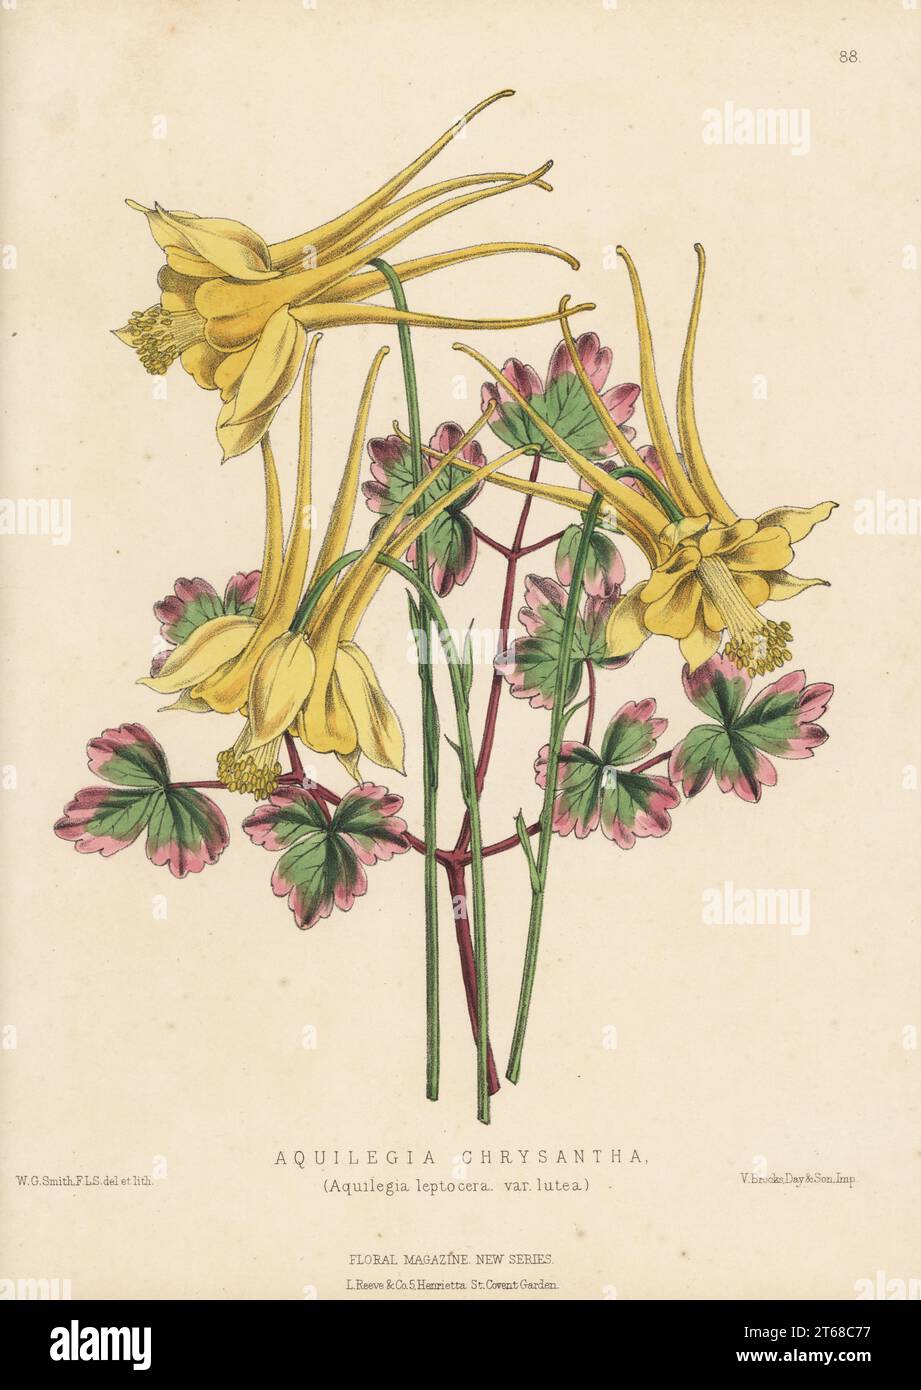 Golden columbine, Aquilegia chrysantha, native to North America, imported by James Backhouse of York. (Aquilegia leptocera var. lutea). Handcolored botanical illustration drawn and lithographed by Worthington George Smith from Henry Honywood Dombrain's Floral Magazine, New Series, Volume 2, L. Reeve, London, 1873. Lithograph printed by Vincent Brooks, Day & Son. Stock Photo